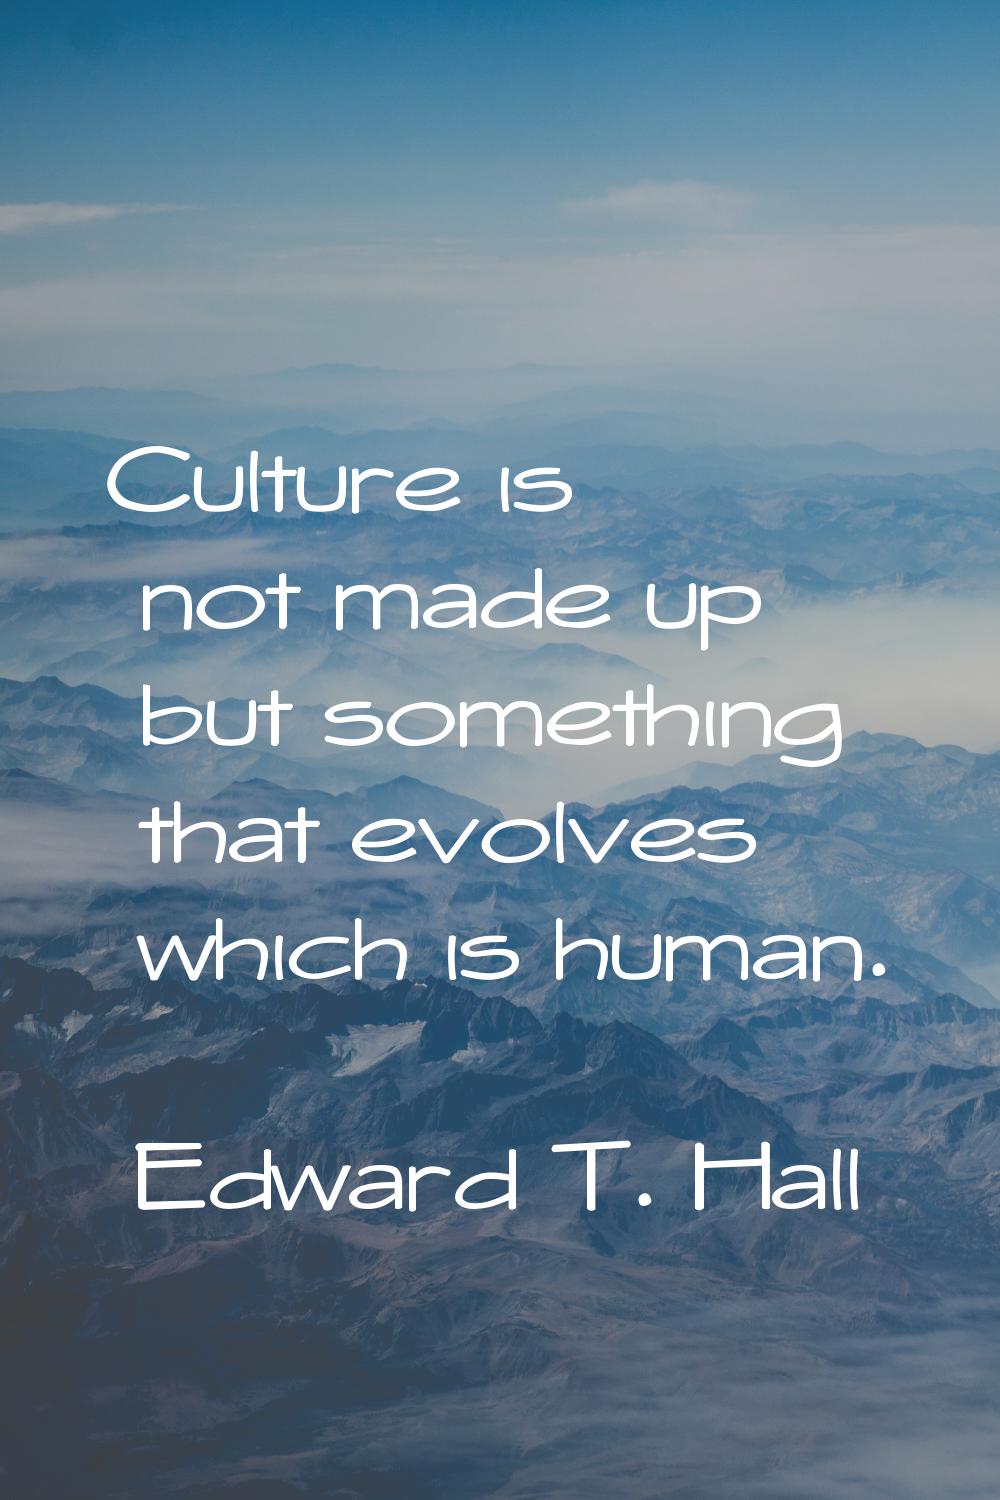 Culture is not made up but something that evolves which is human.